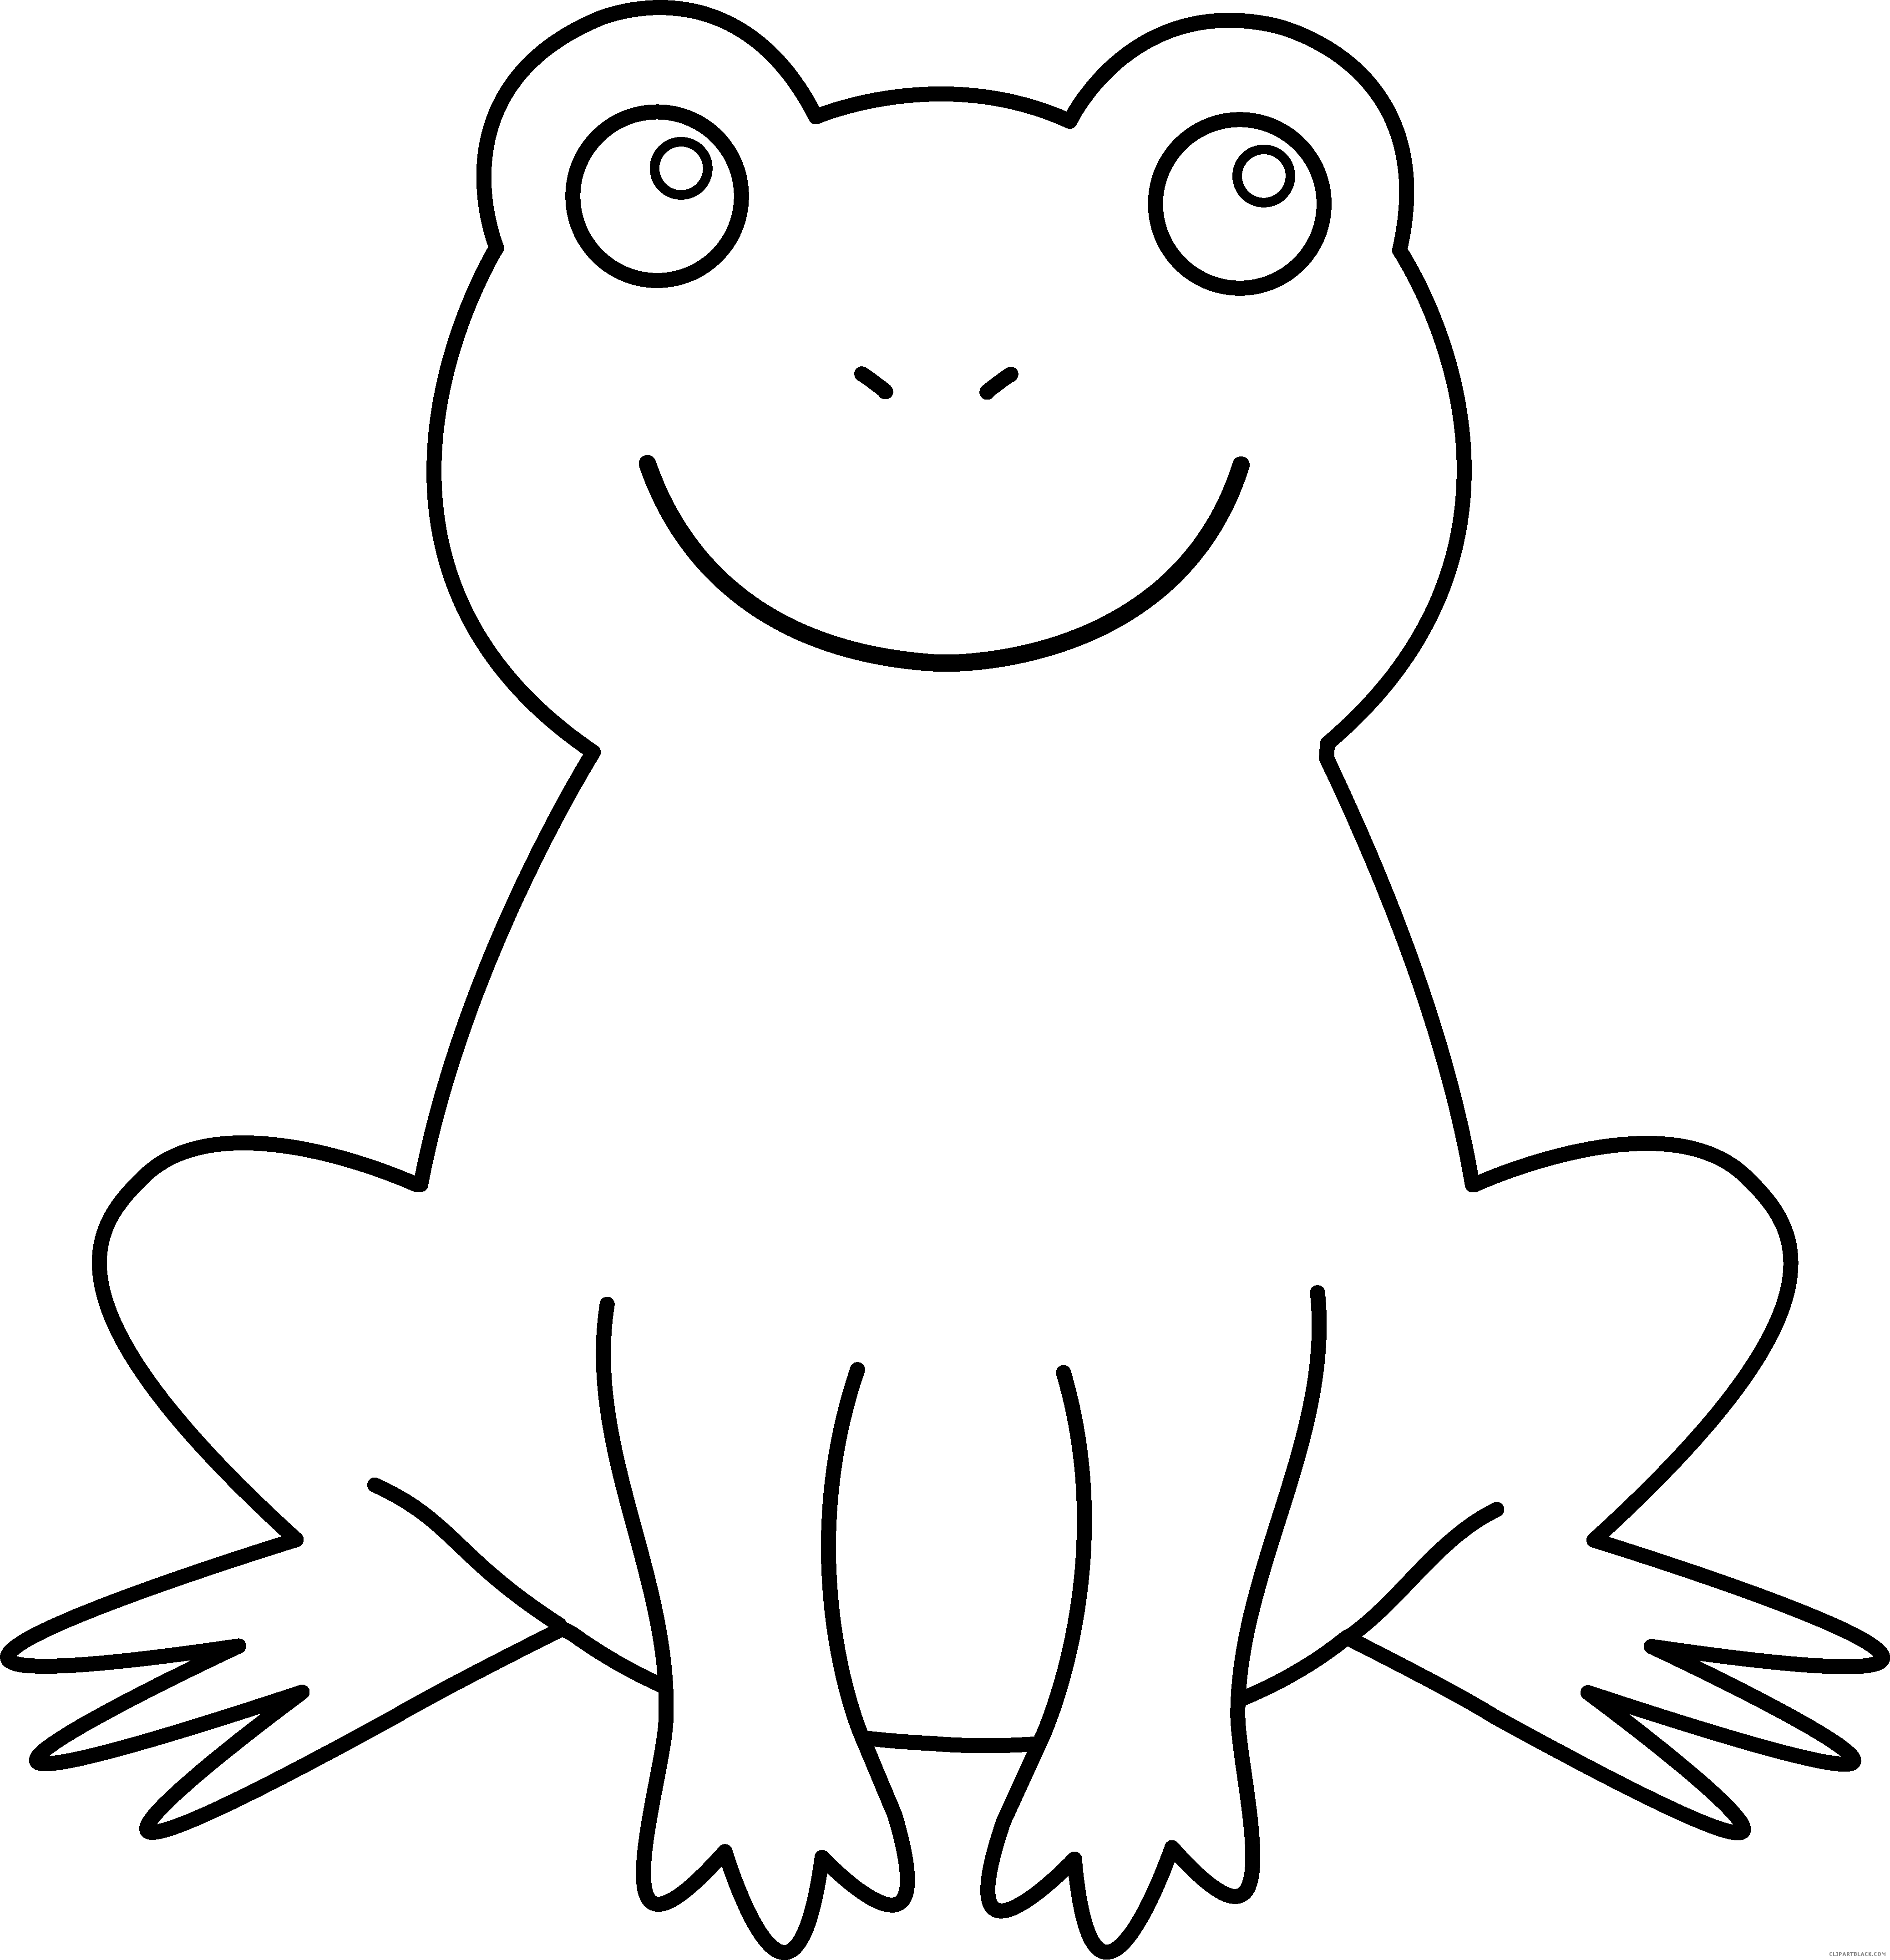 Toad clipart drawing. Clipartblack com animal free